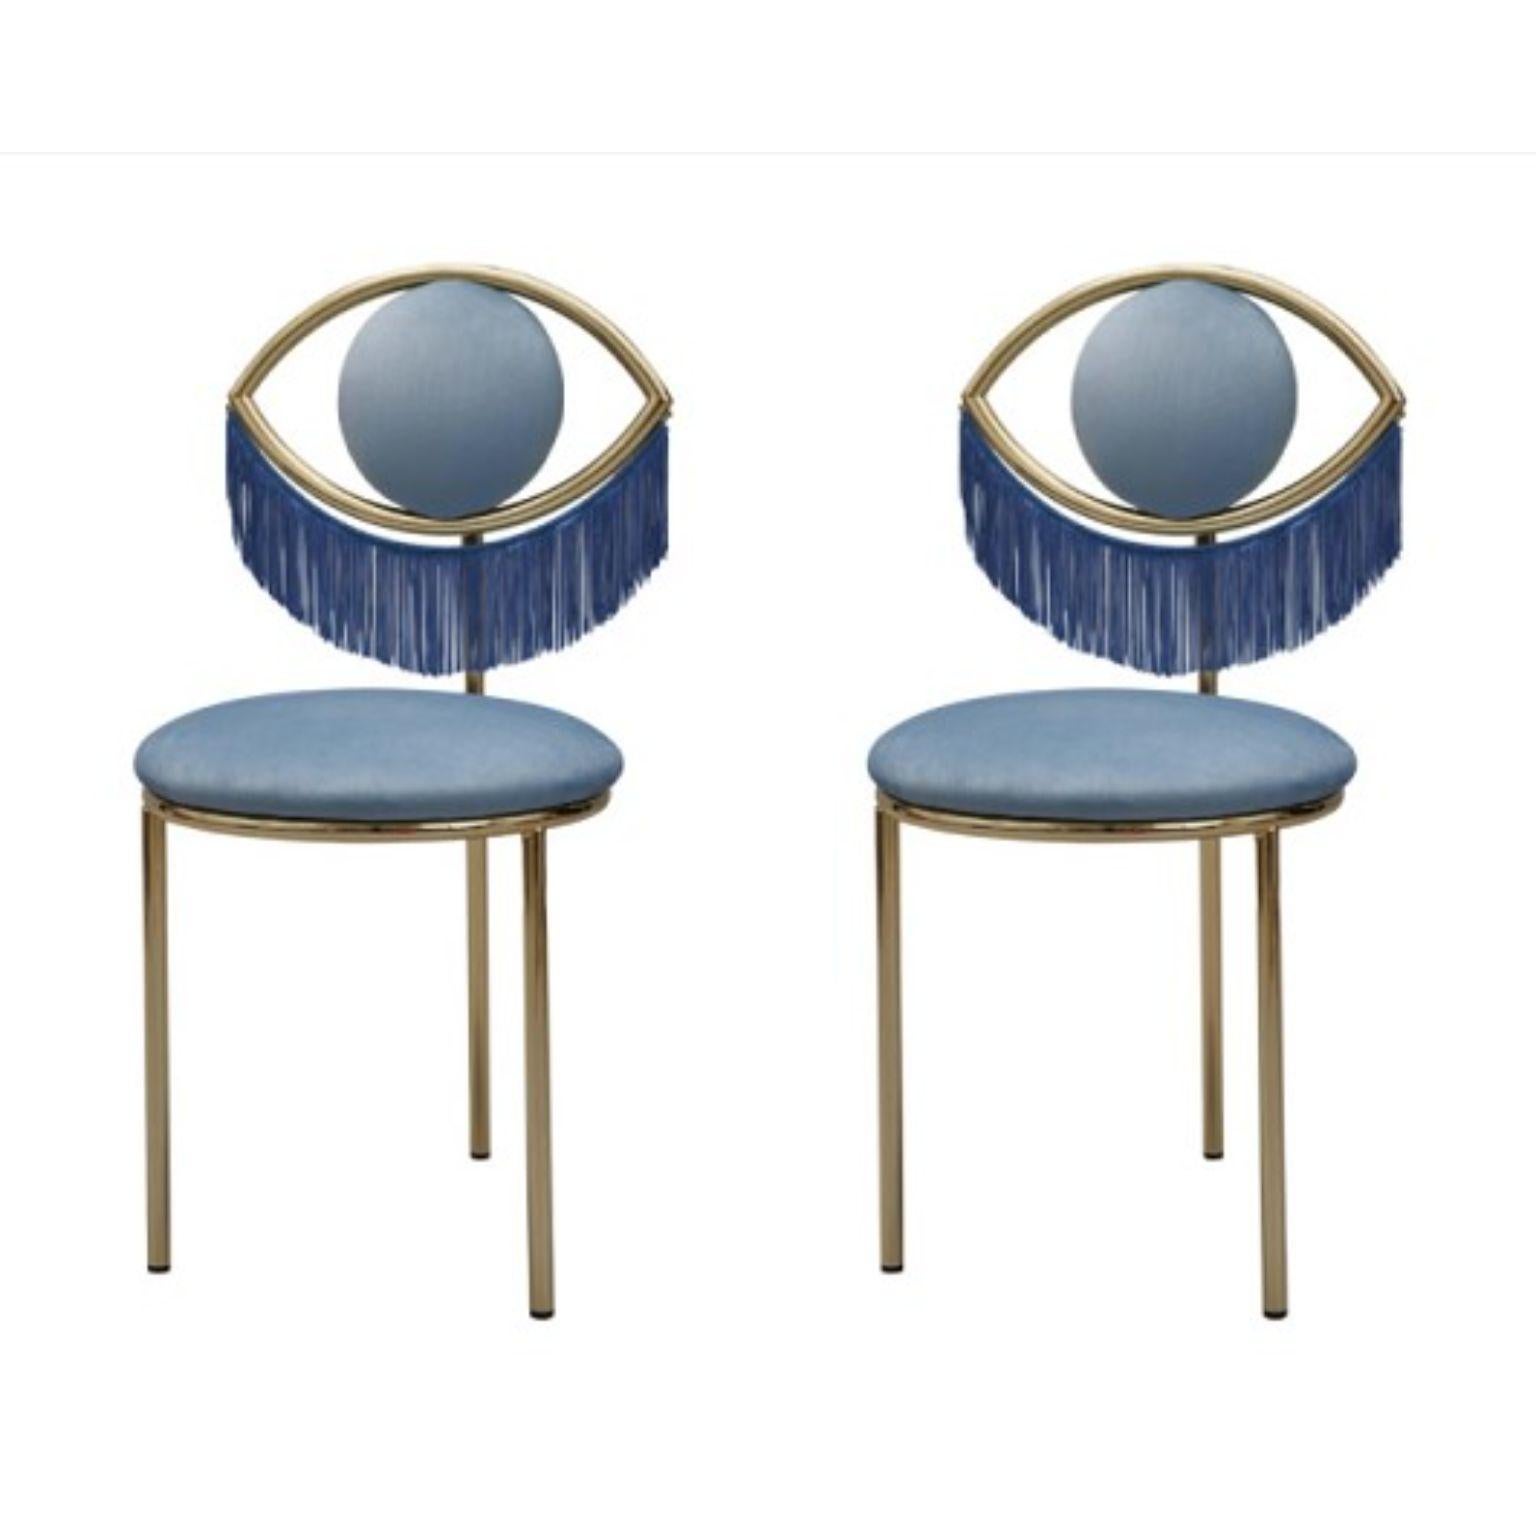 Set of 2 Wink Chairs by Masquespacio
Dimensions: H 83 x W 42 cm
Materials: Robust curved iron tubebathed in 24 Carats gold


Structure: 20 mm robust curved iron tubebathed in 24 Carats gold.
Approvals: Qualicoat License P-0504 / GSB License